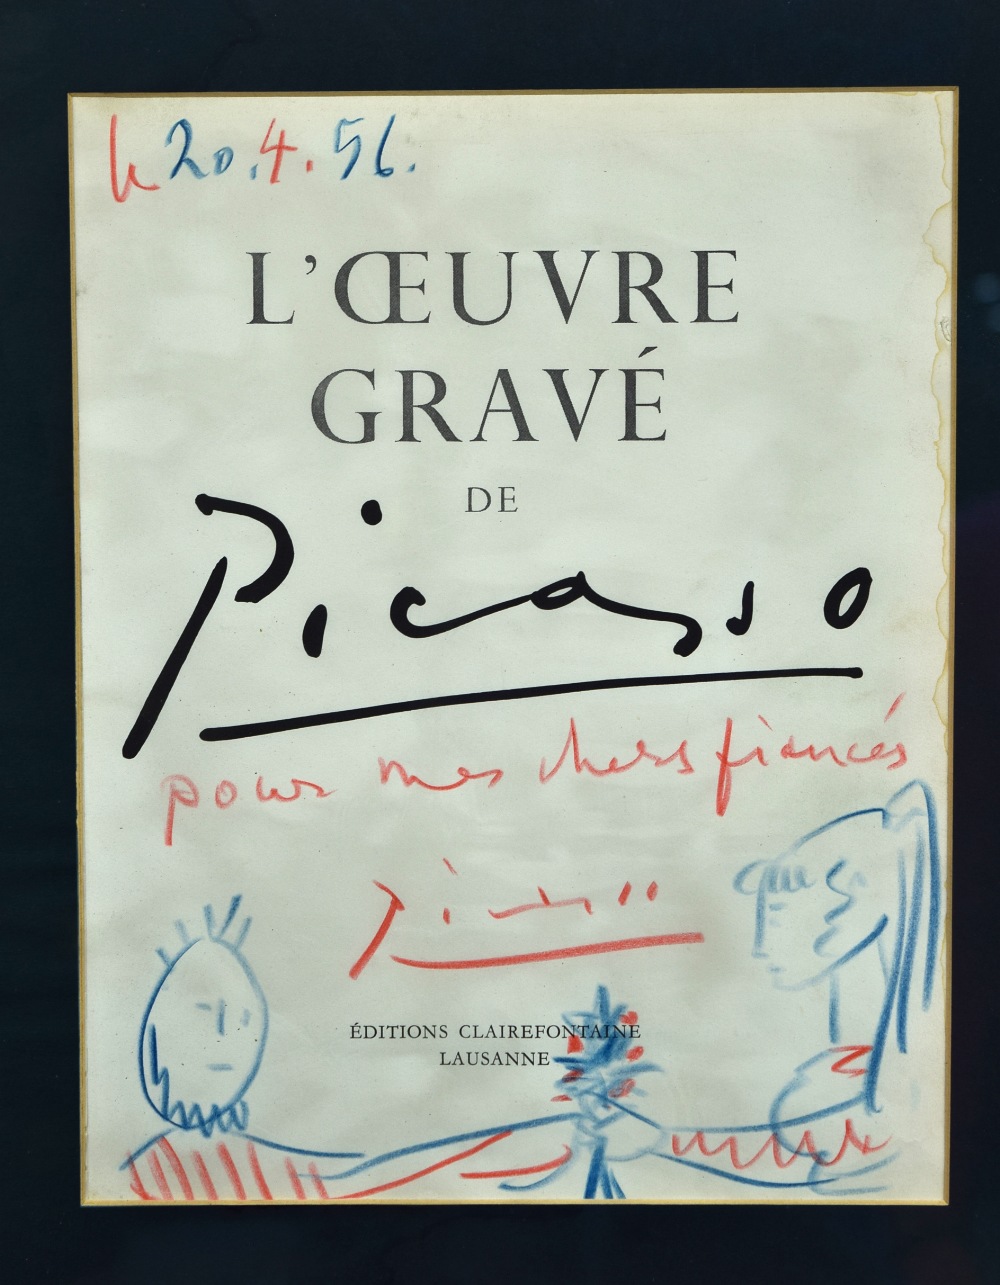 § Pablo Picasso (Spanish, 1881-1973) "Pour mes chers fiancés" - a signed and inscribed title page of